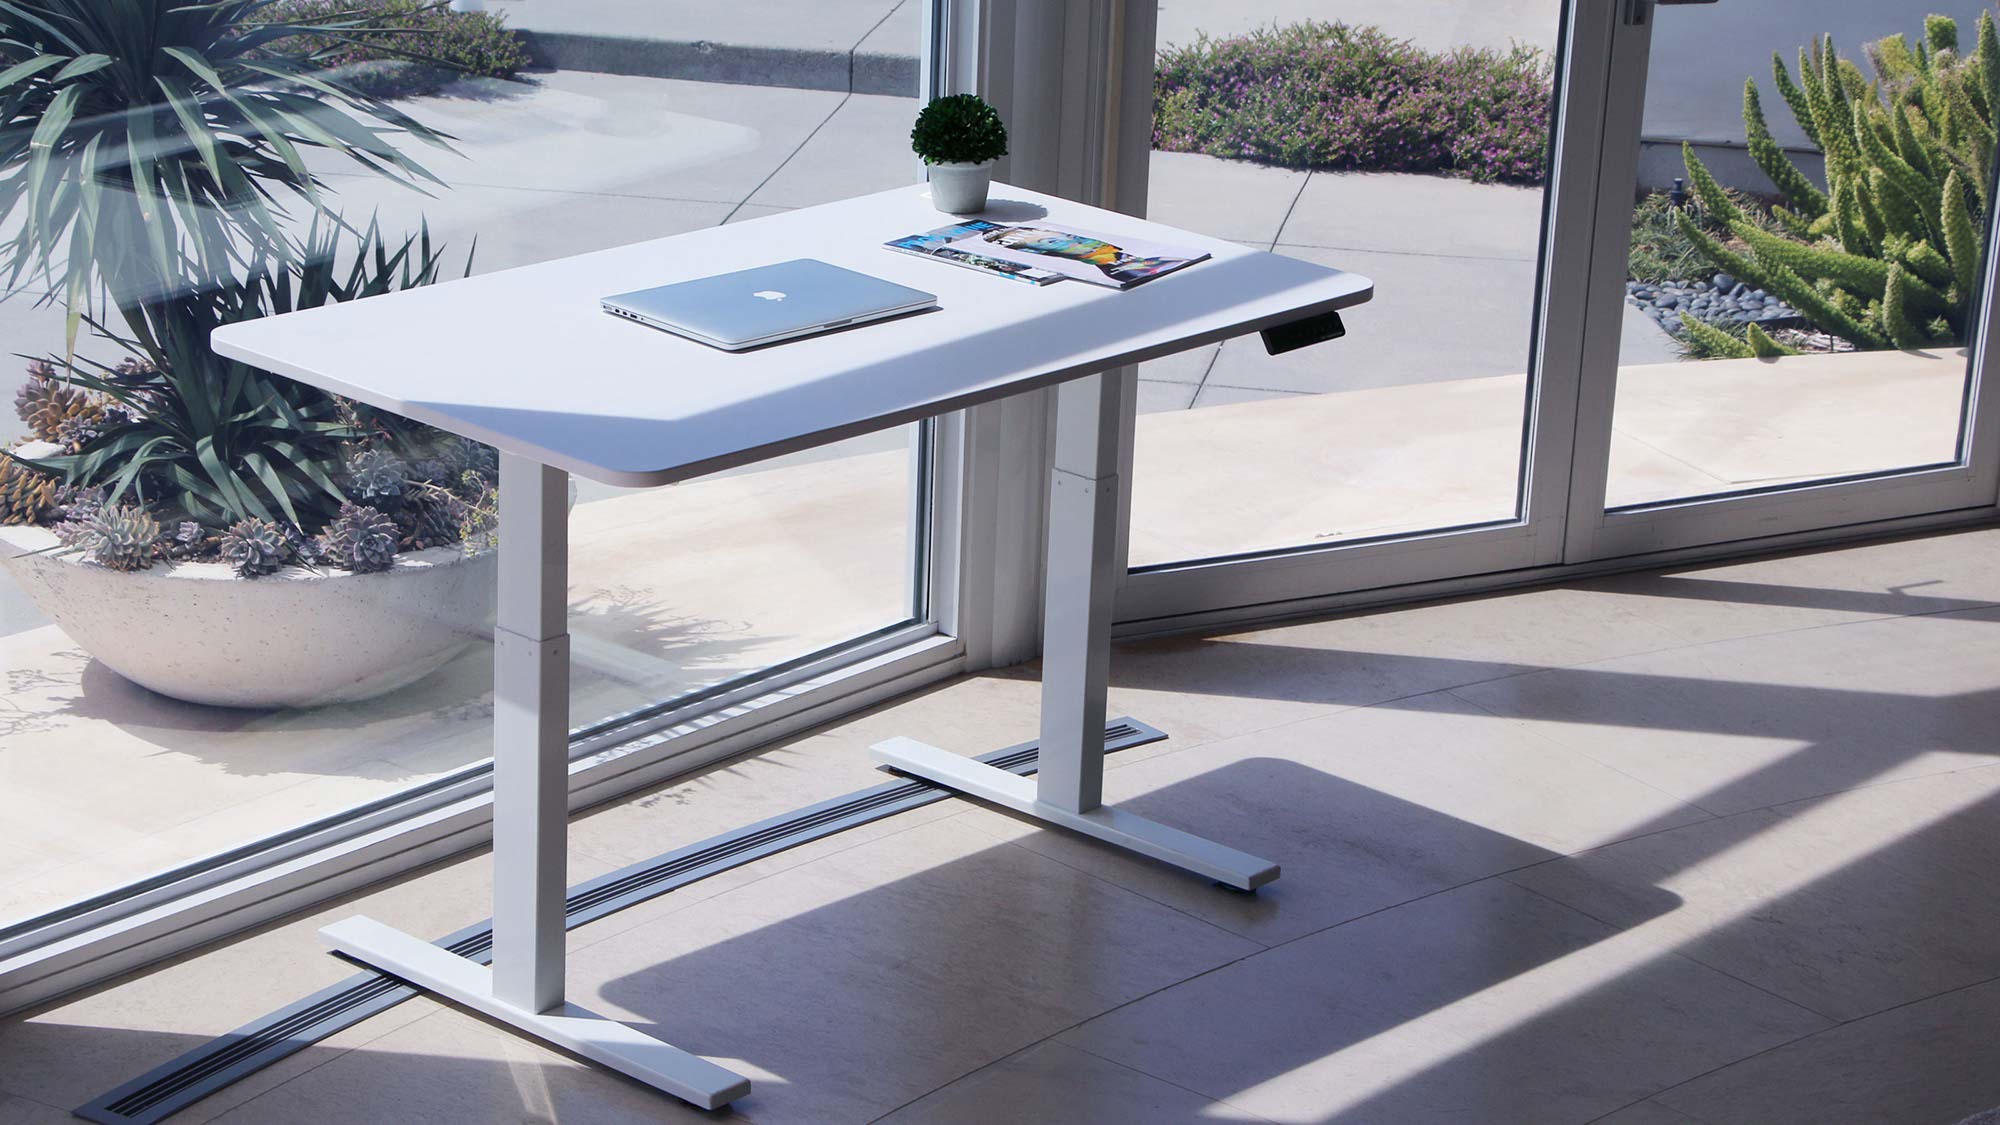 Electric adjustable height desk with frame lowest factory price